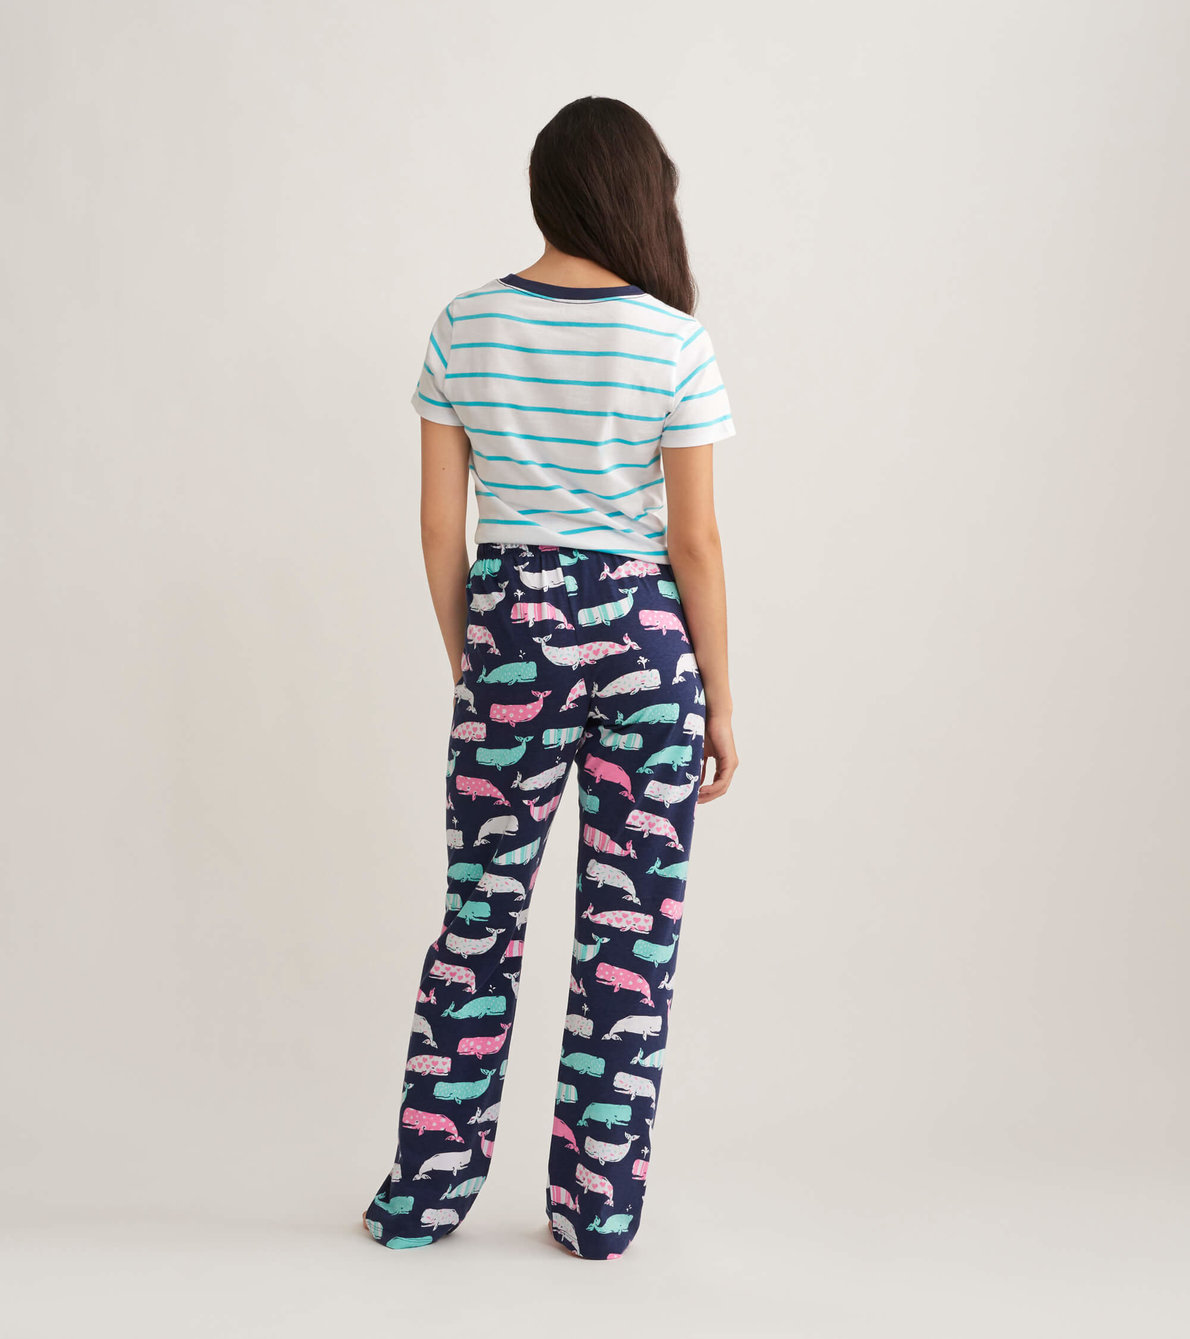 View larger image of Nautical Whales Women's Tee and Pants Pajama Separates